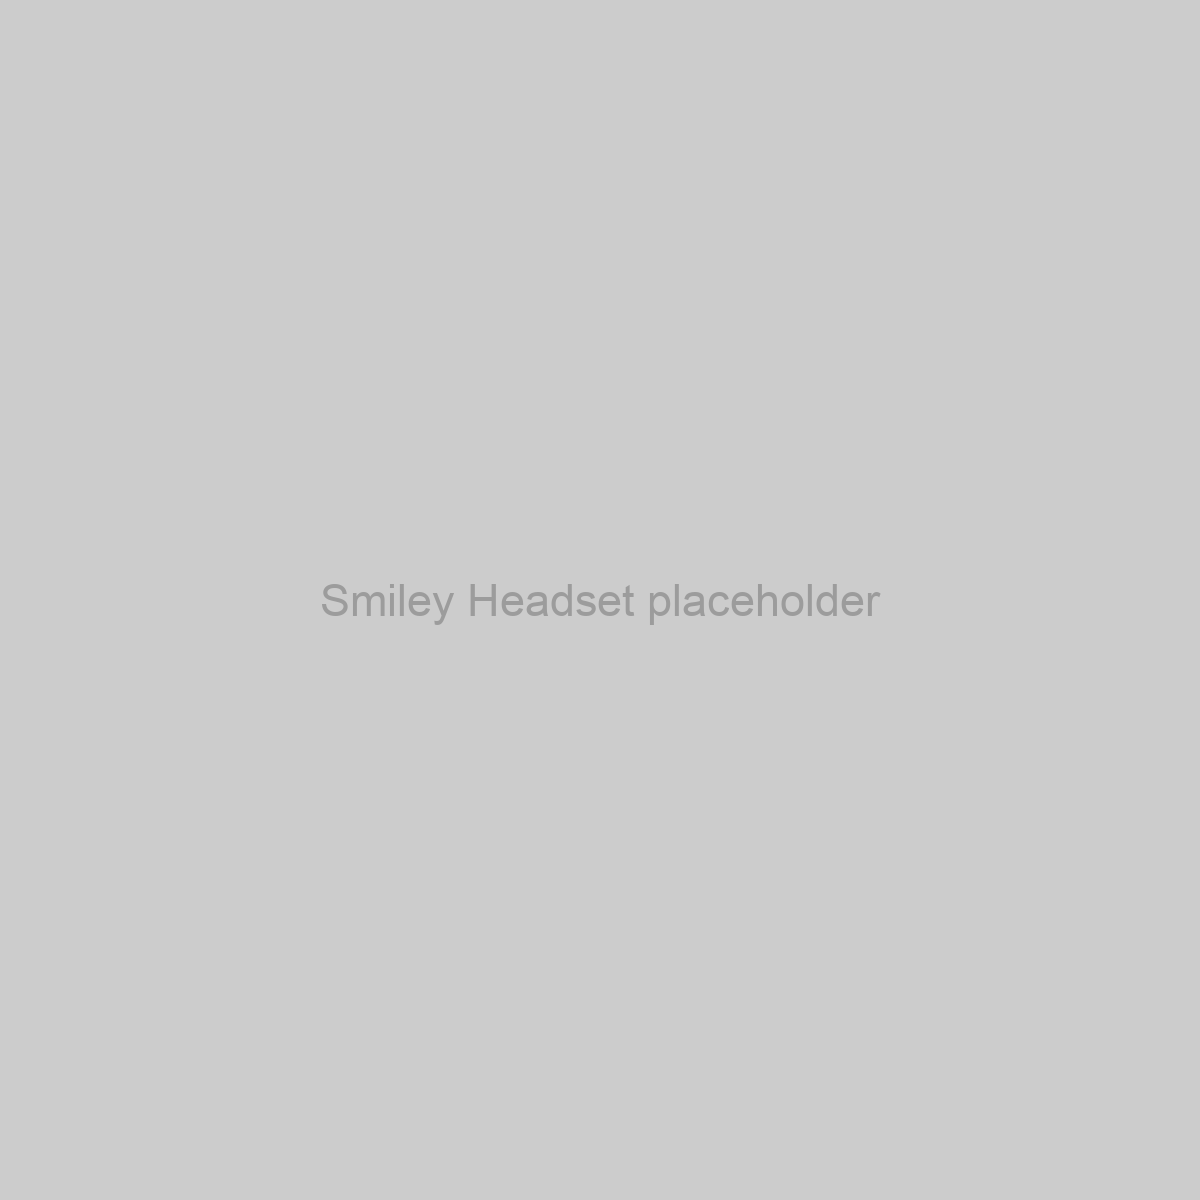 Smiley Headset Placeholder Image